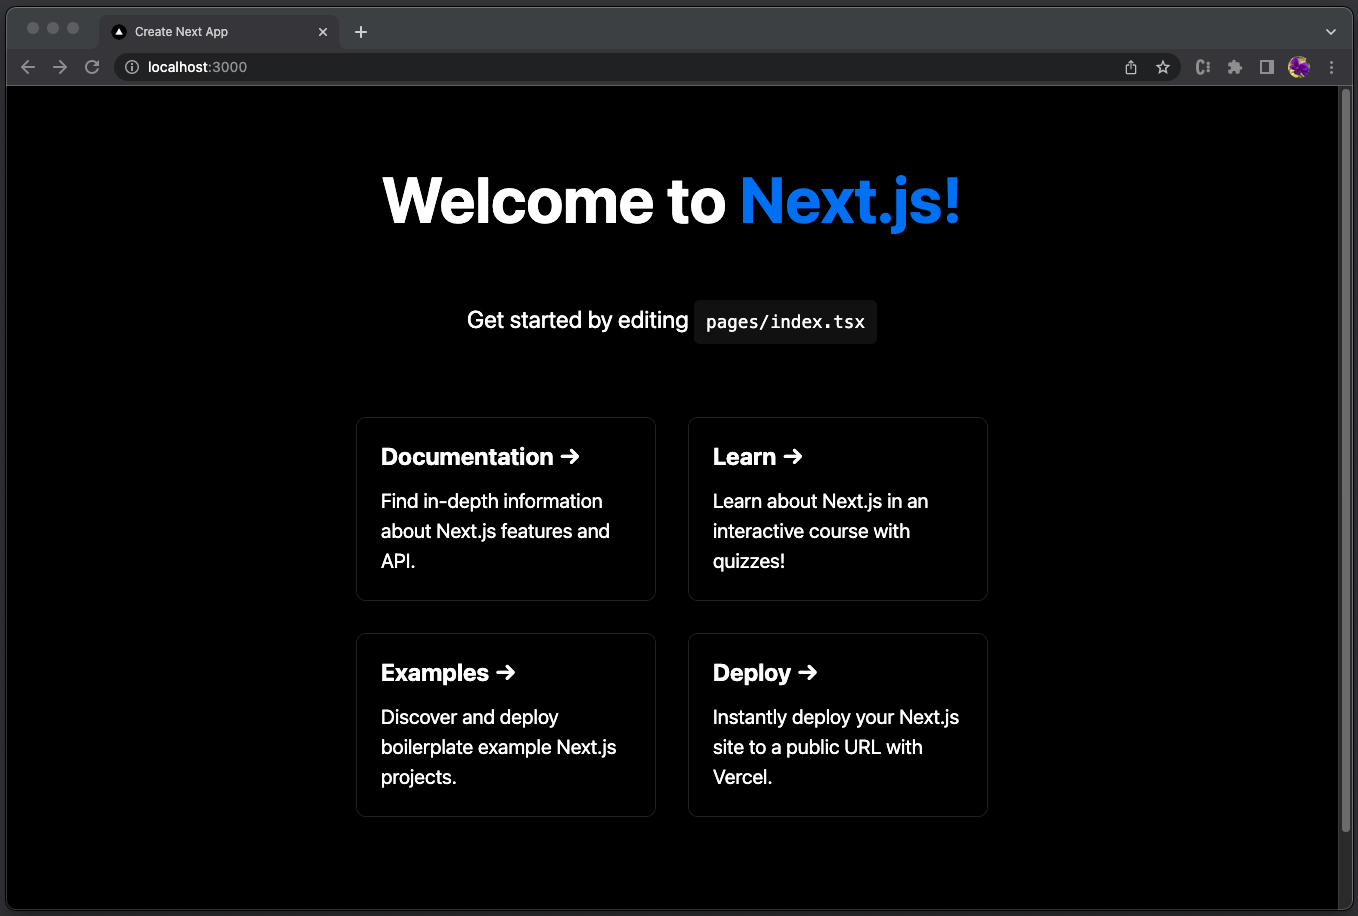 Next.js’ welcome page